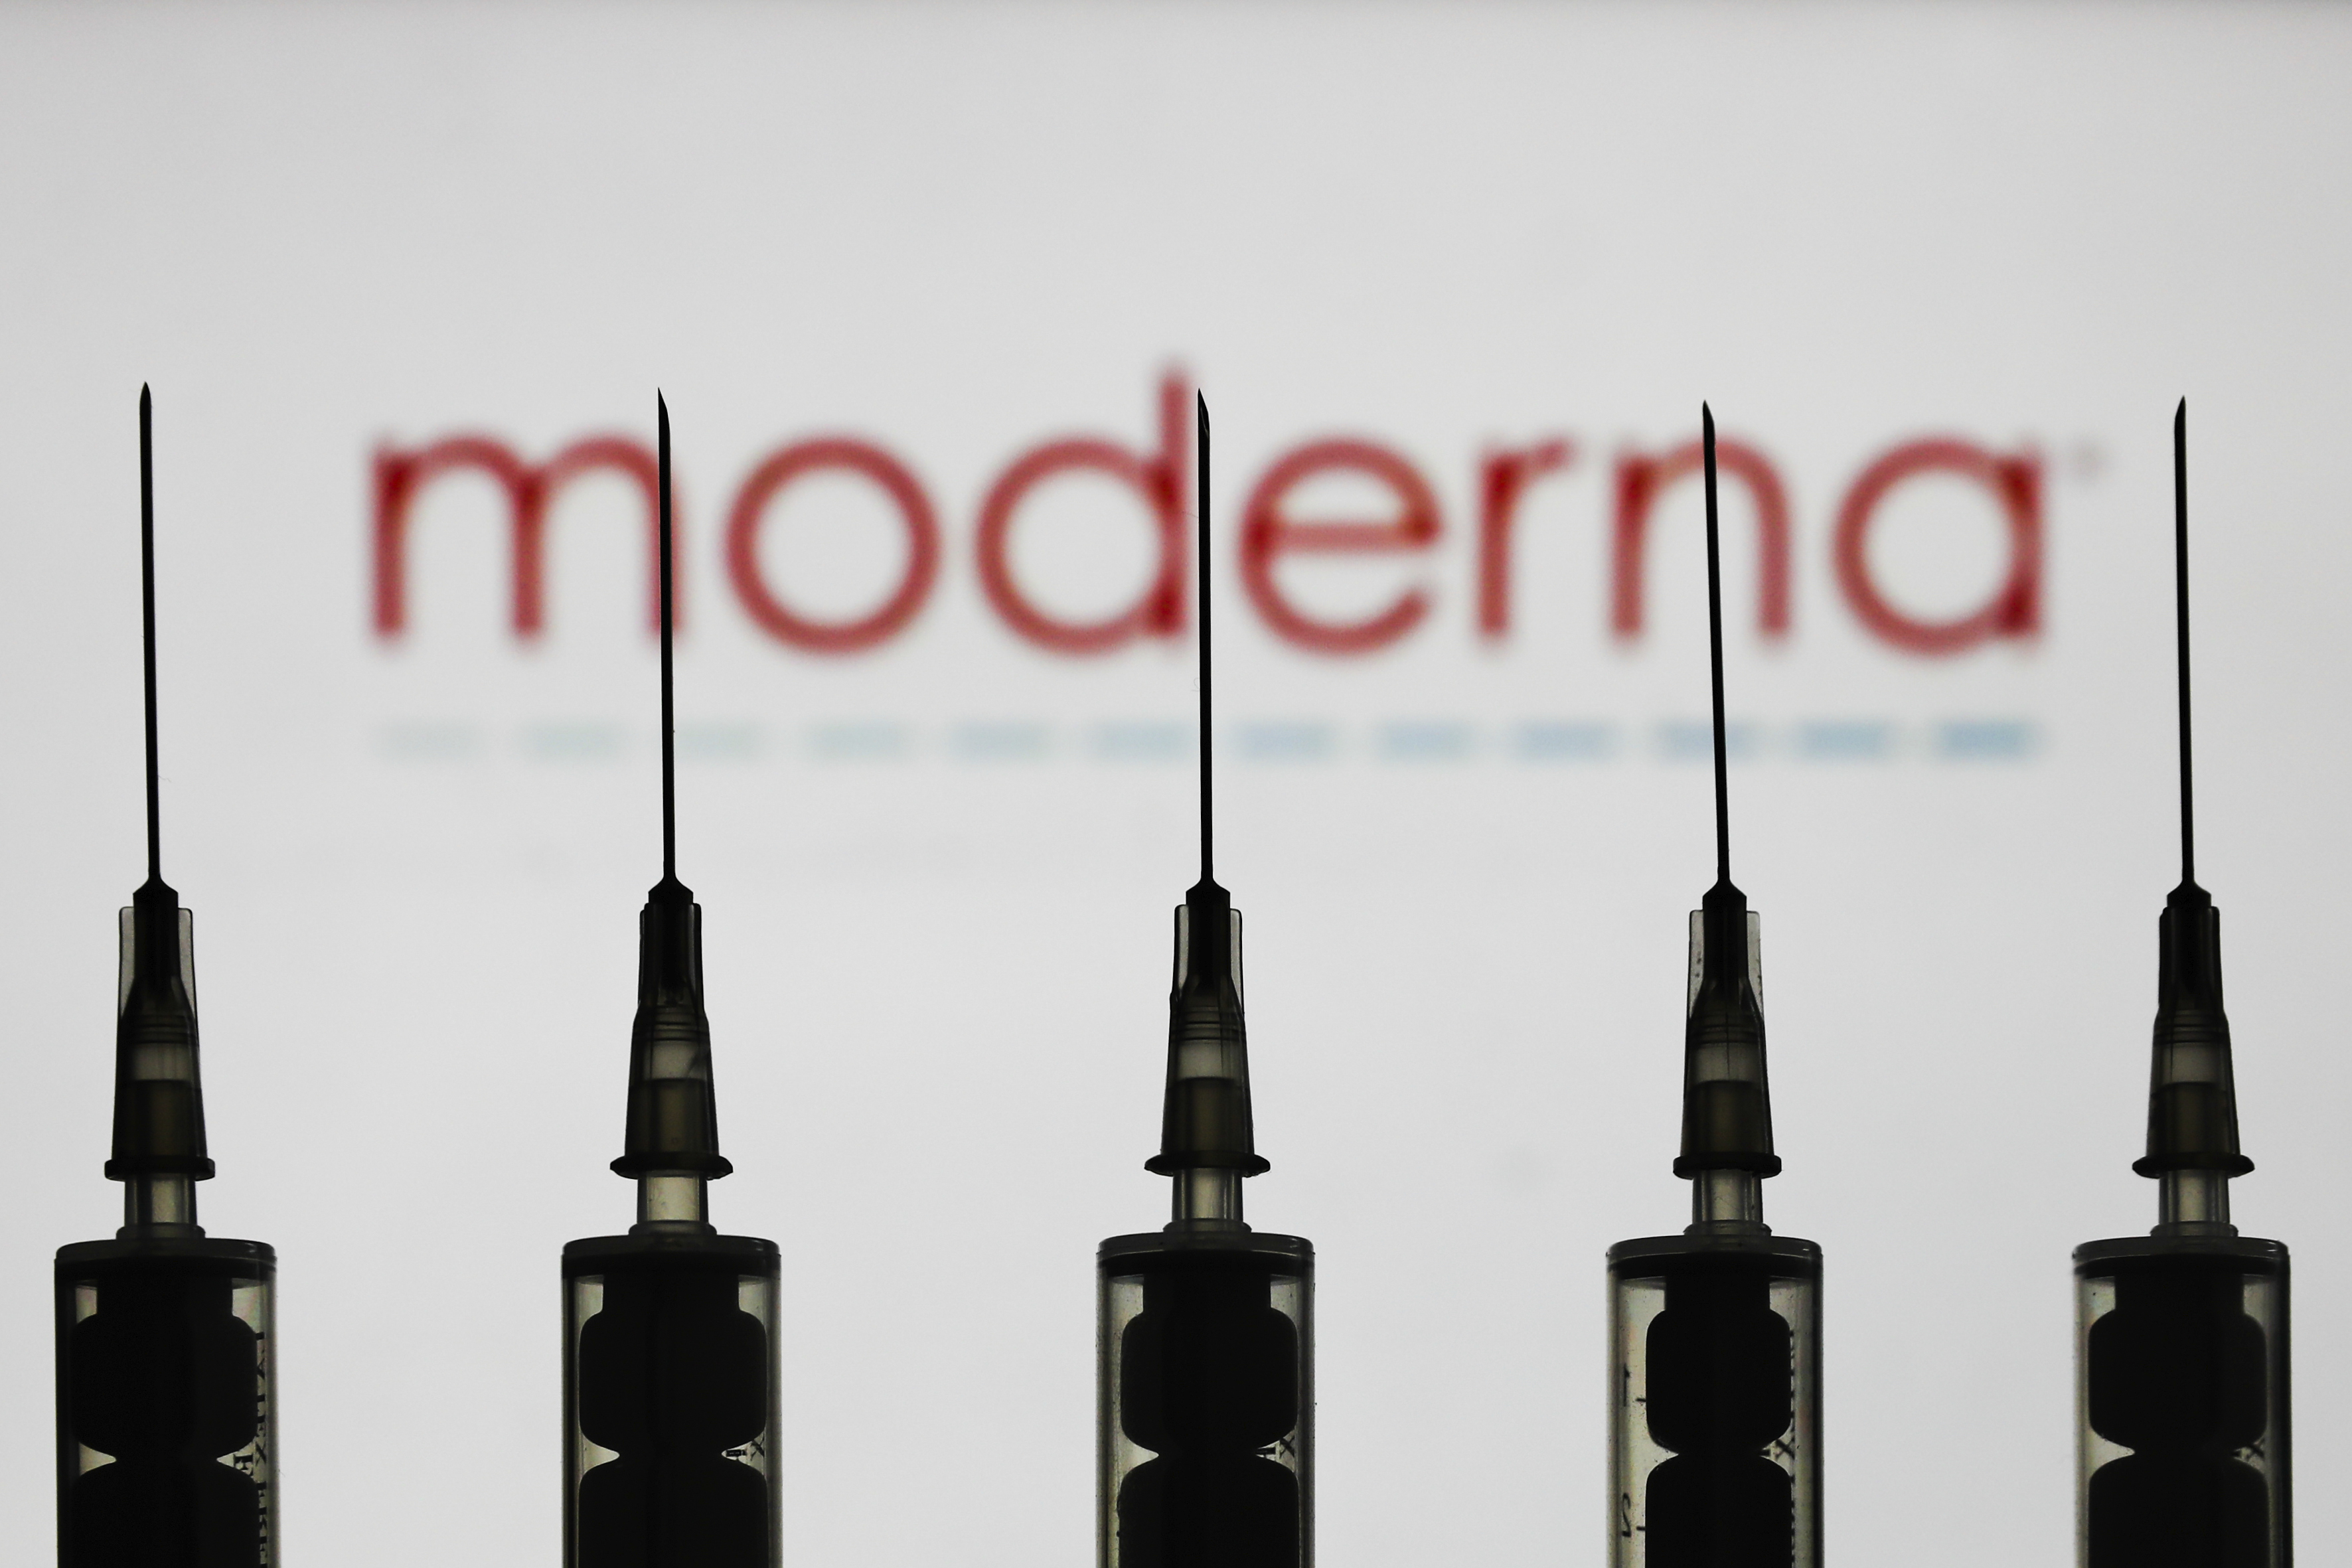 Medical syringes are seen with Moderna company logo displayed on a screen in the background in this illustration photo taken in Poland on October 12, 2020. (Photo illustration by Jakub Porzycki/NurPhoto via AP)